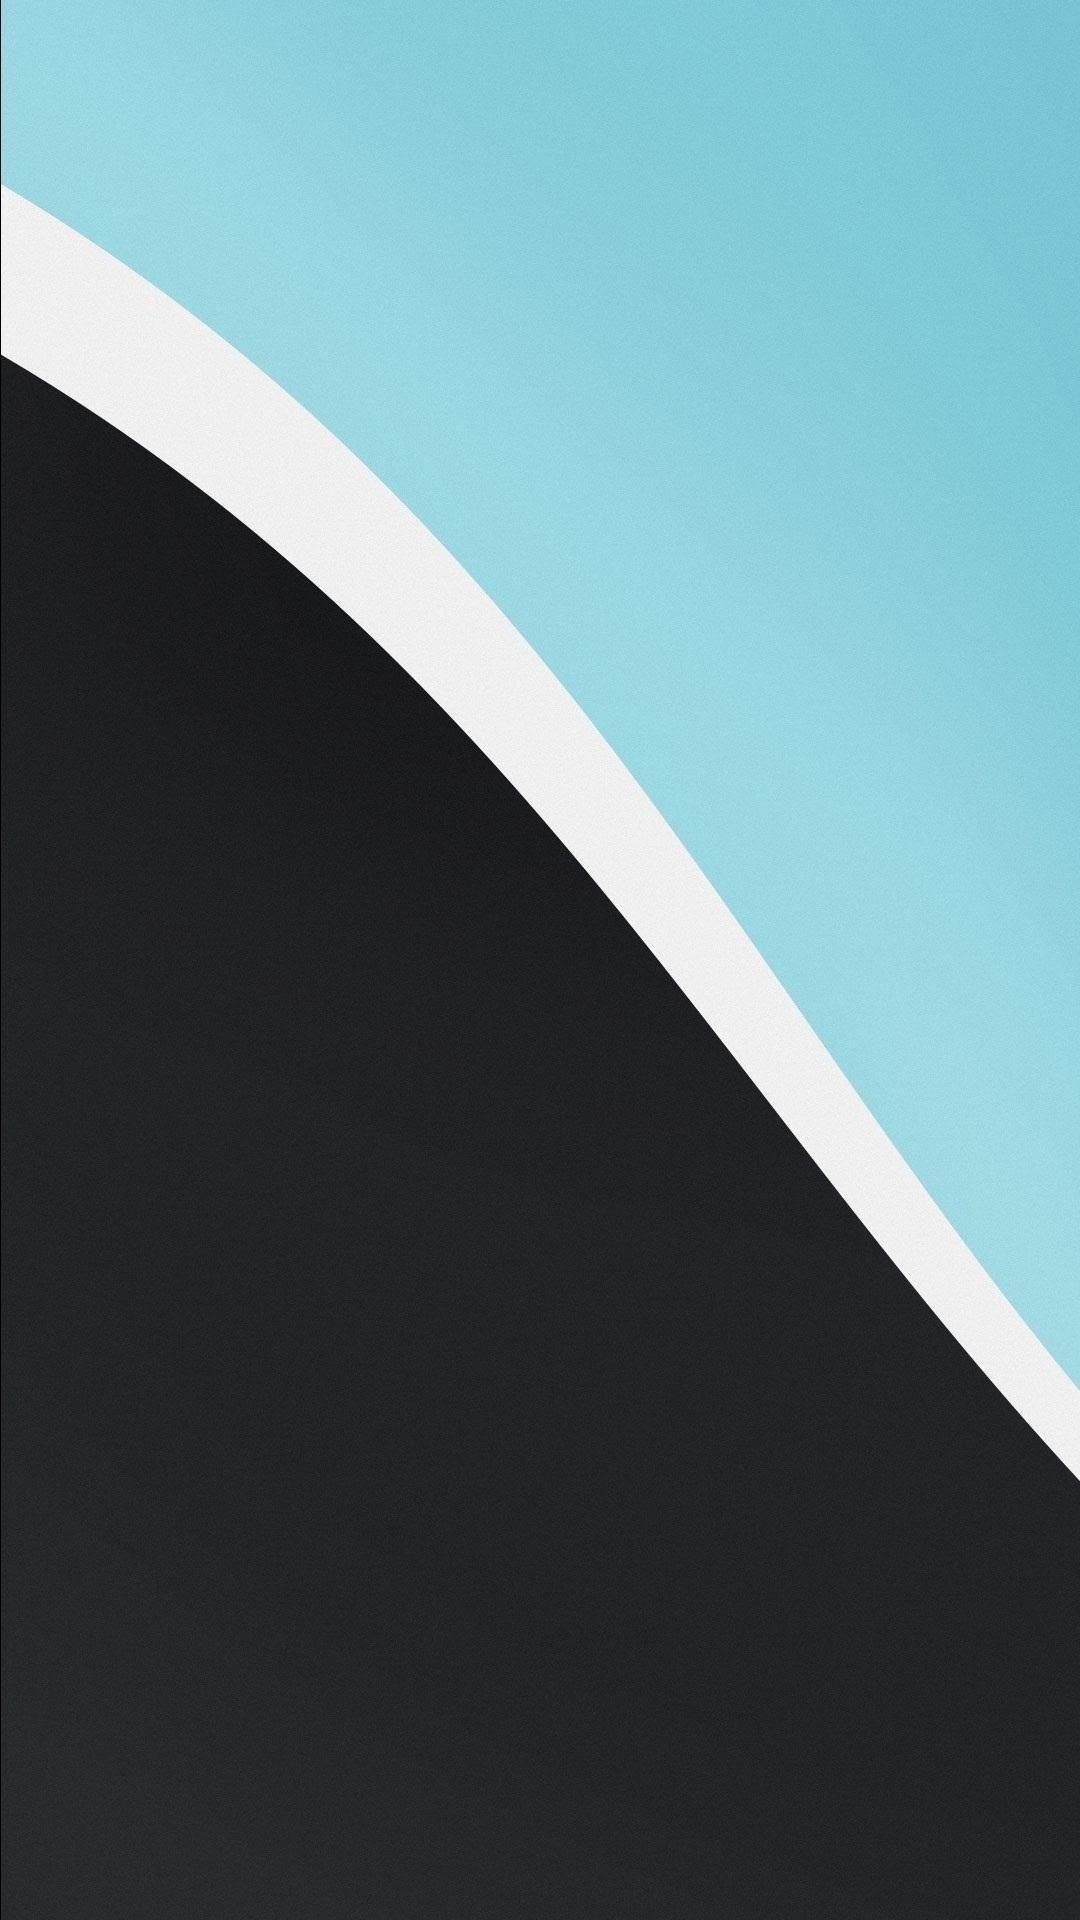 Get the HTC One's New Wallpapers on Any of Your Android Devices Now